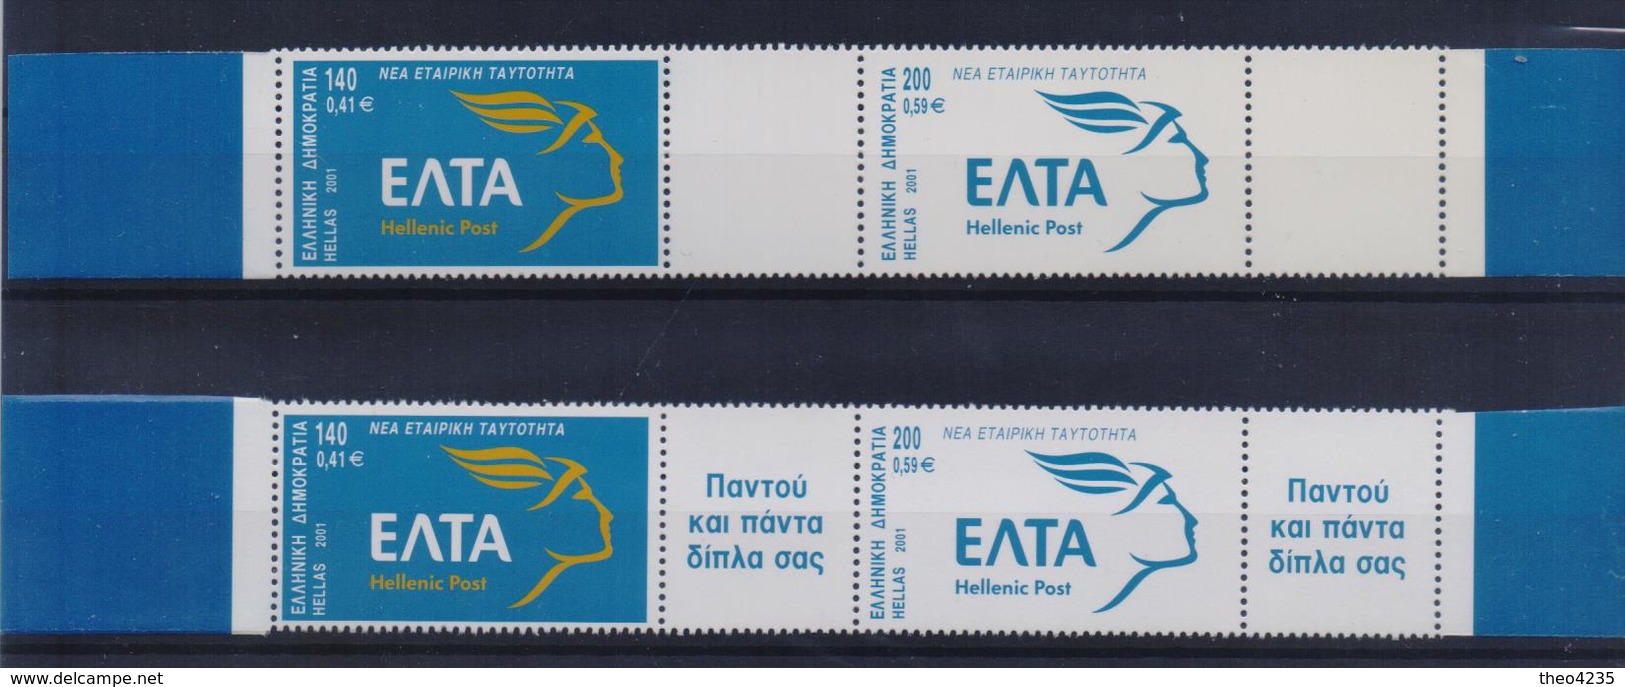 GREECE STAMPS 2001/ELTA-NEW COMPANY IDENTITY(elta & Blank Label)-8/9/01-MNH-VERY RARE!!!! - Unused Stamps